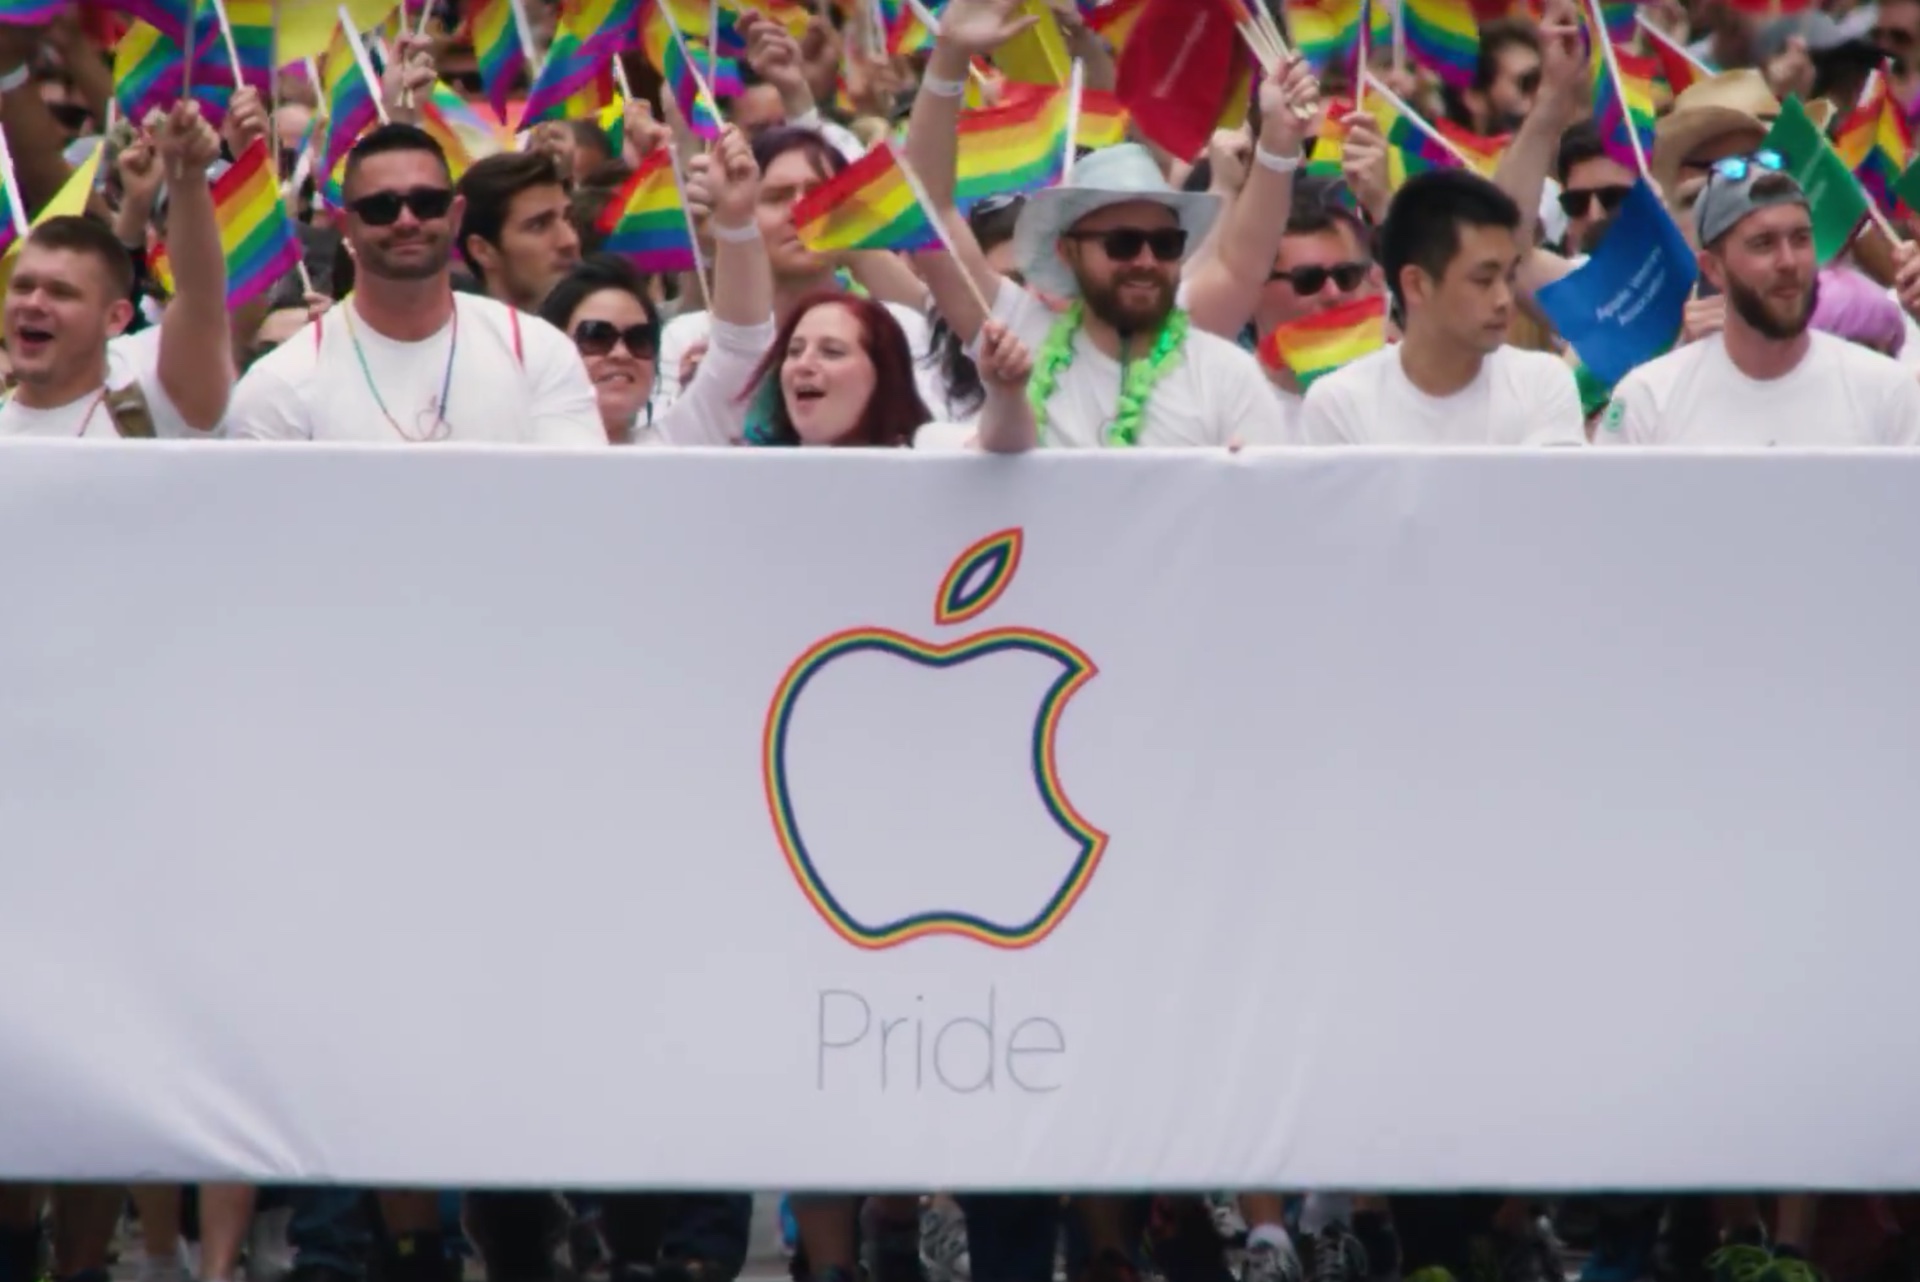 Conservative shareholders call for Apple to be “less liberal”